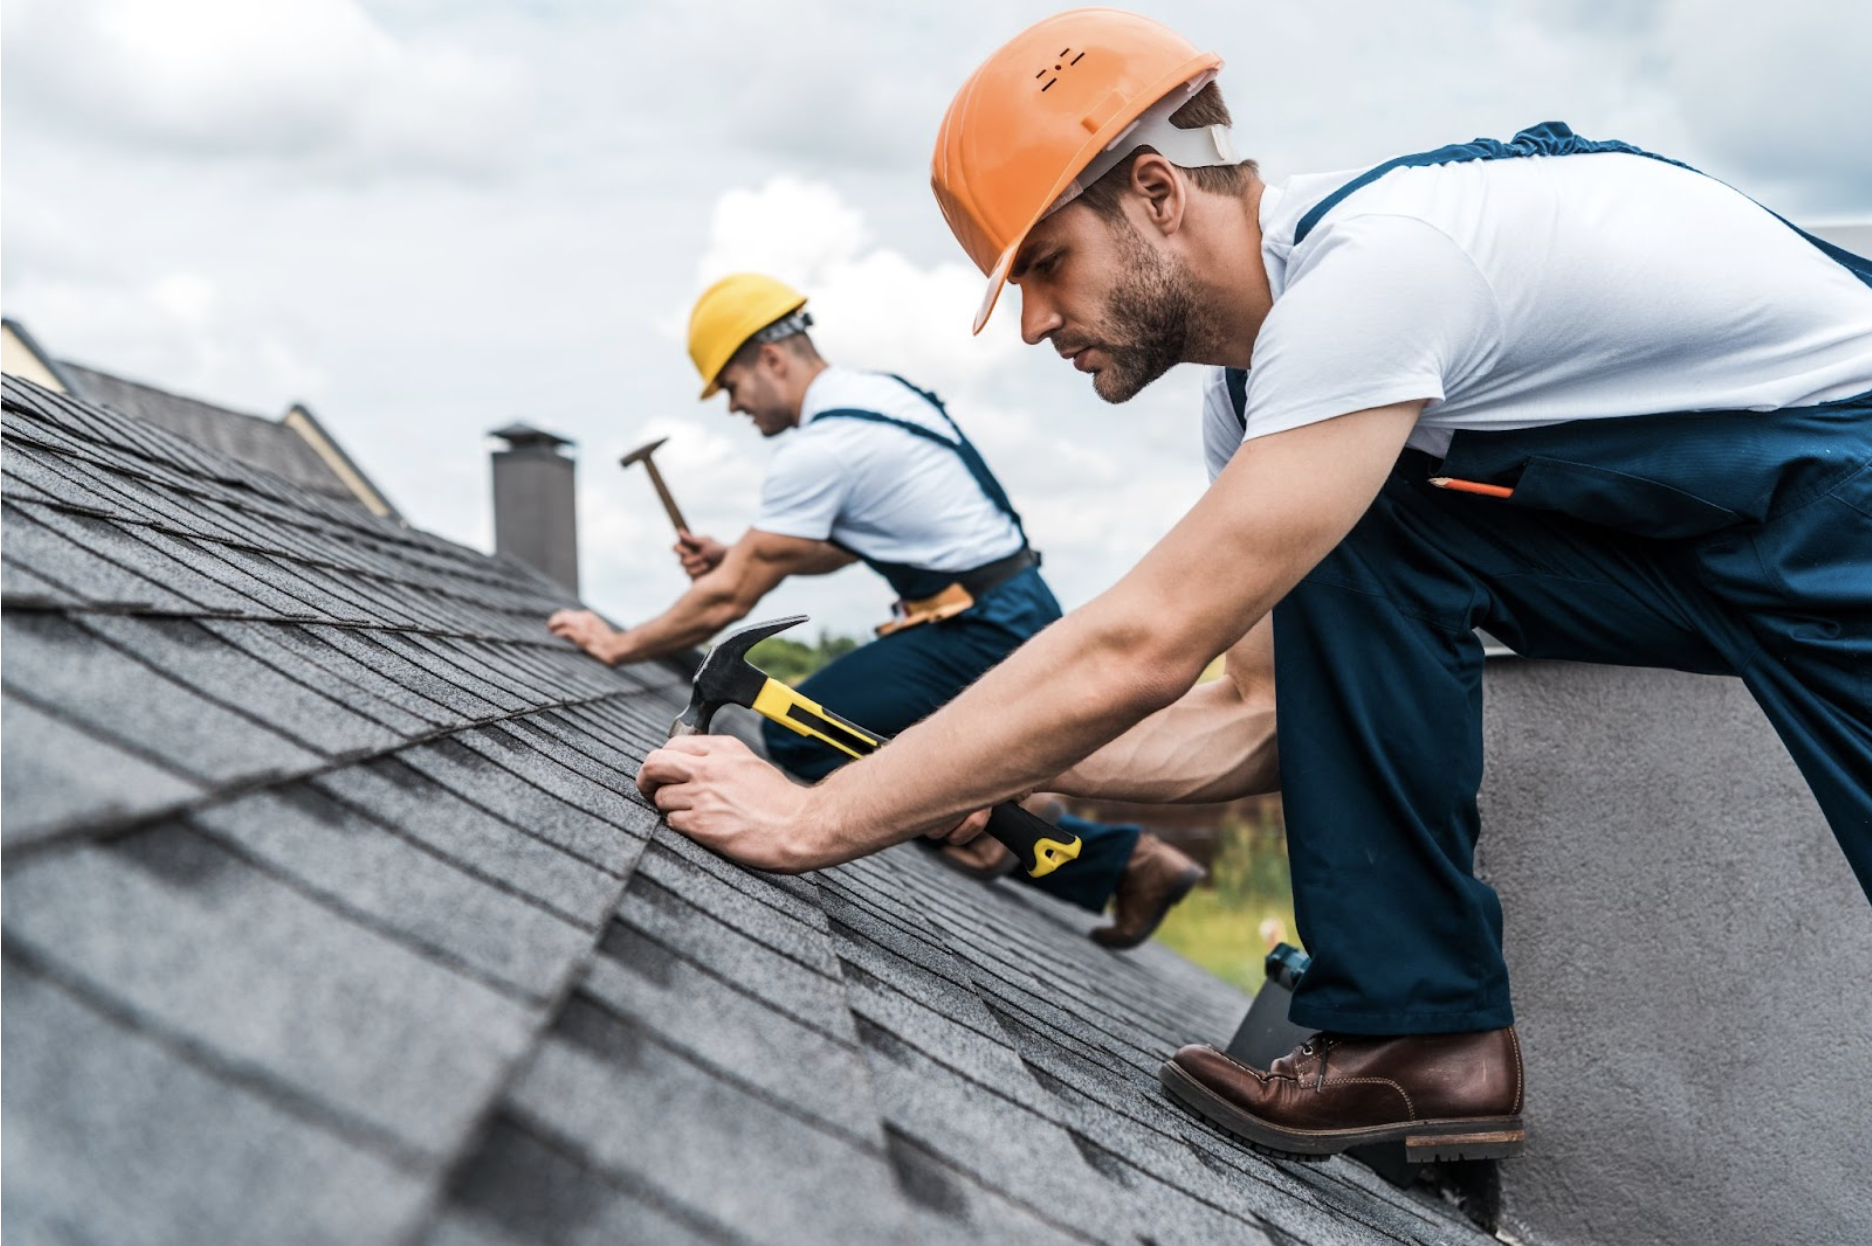 California Roofing Contractor License Guide | Surety First